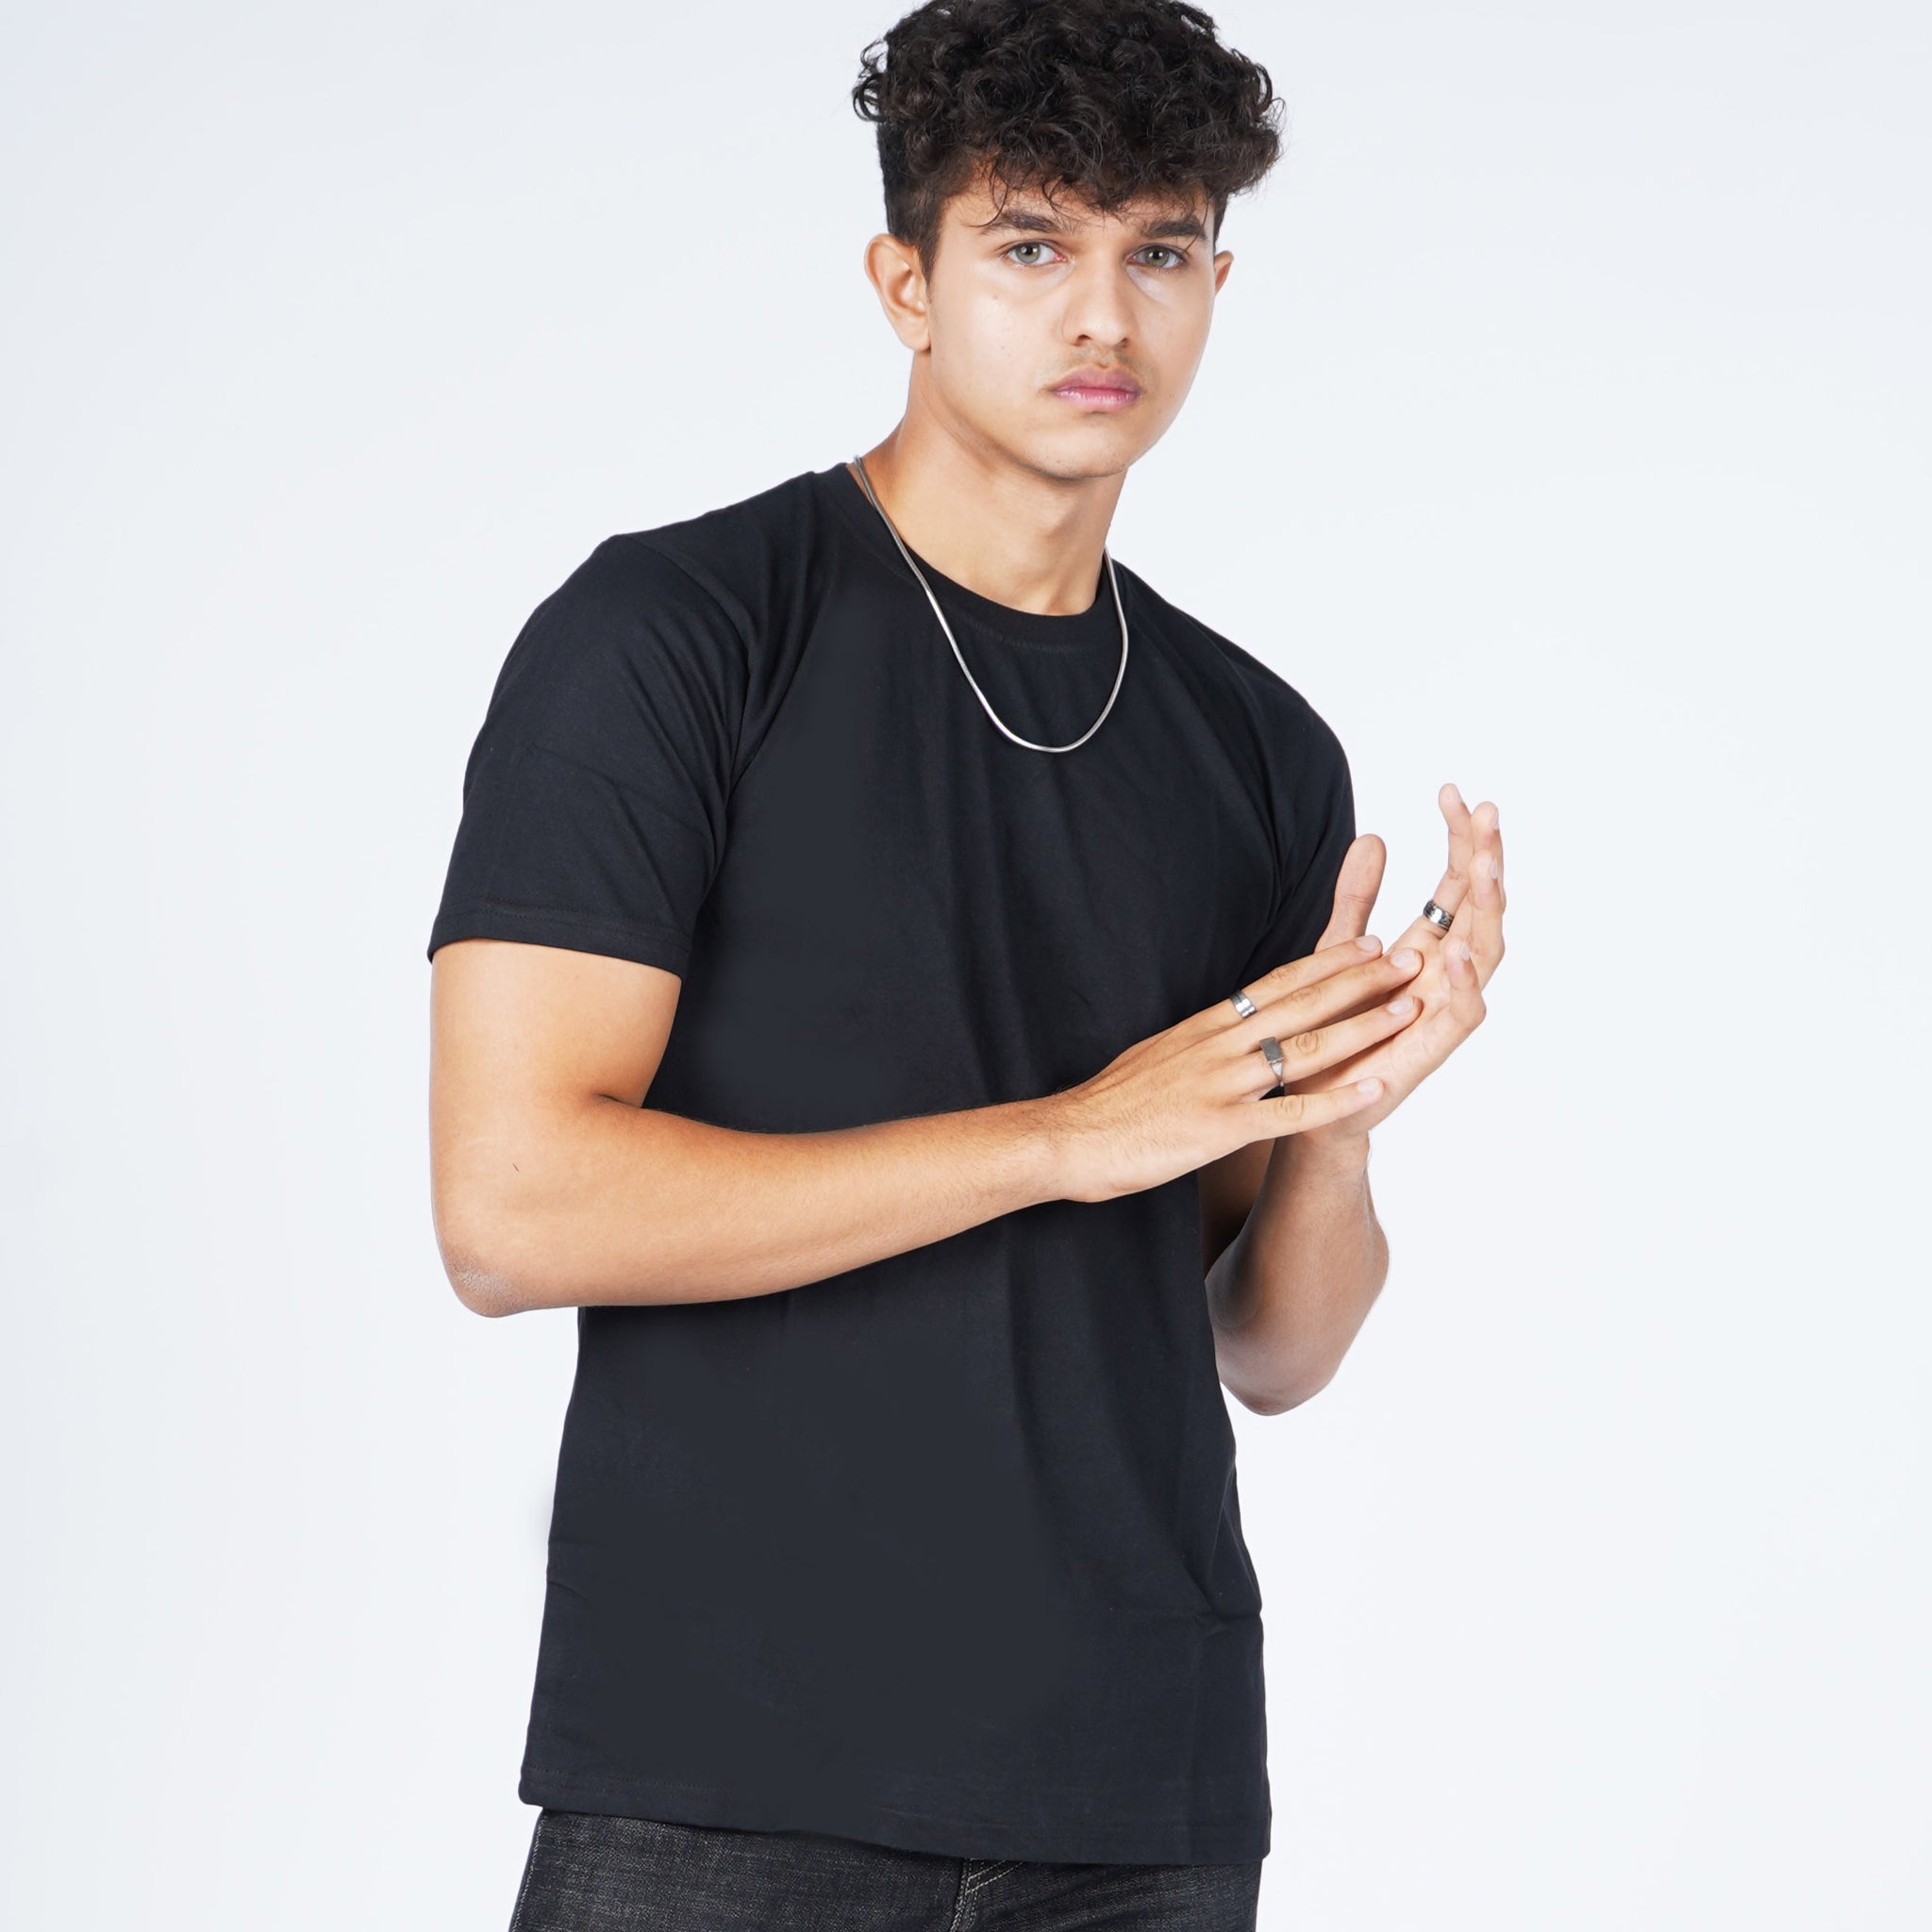 Black Solid T-shirt Crew Cut/Round Neck Short Sleeves